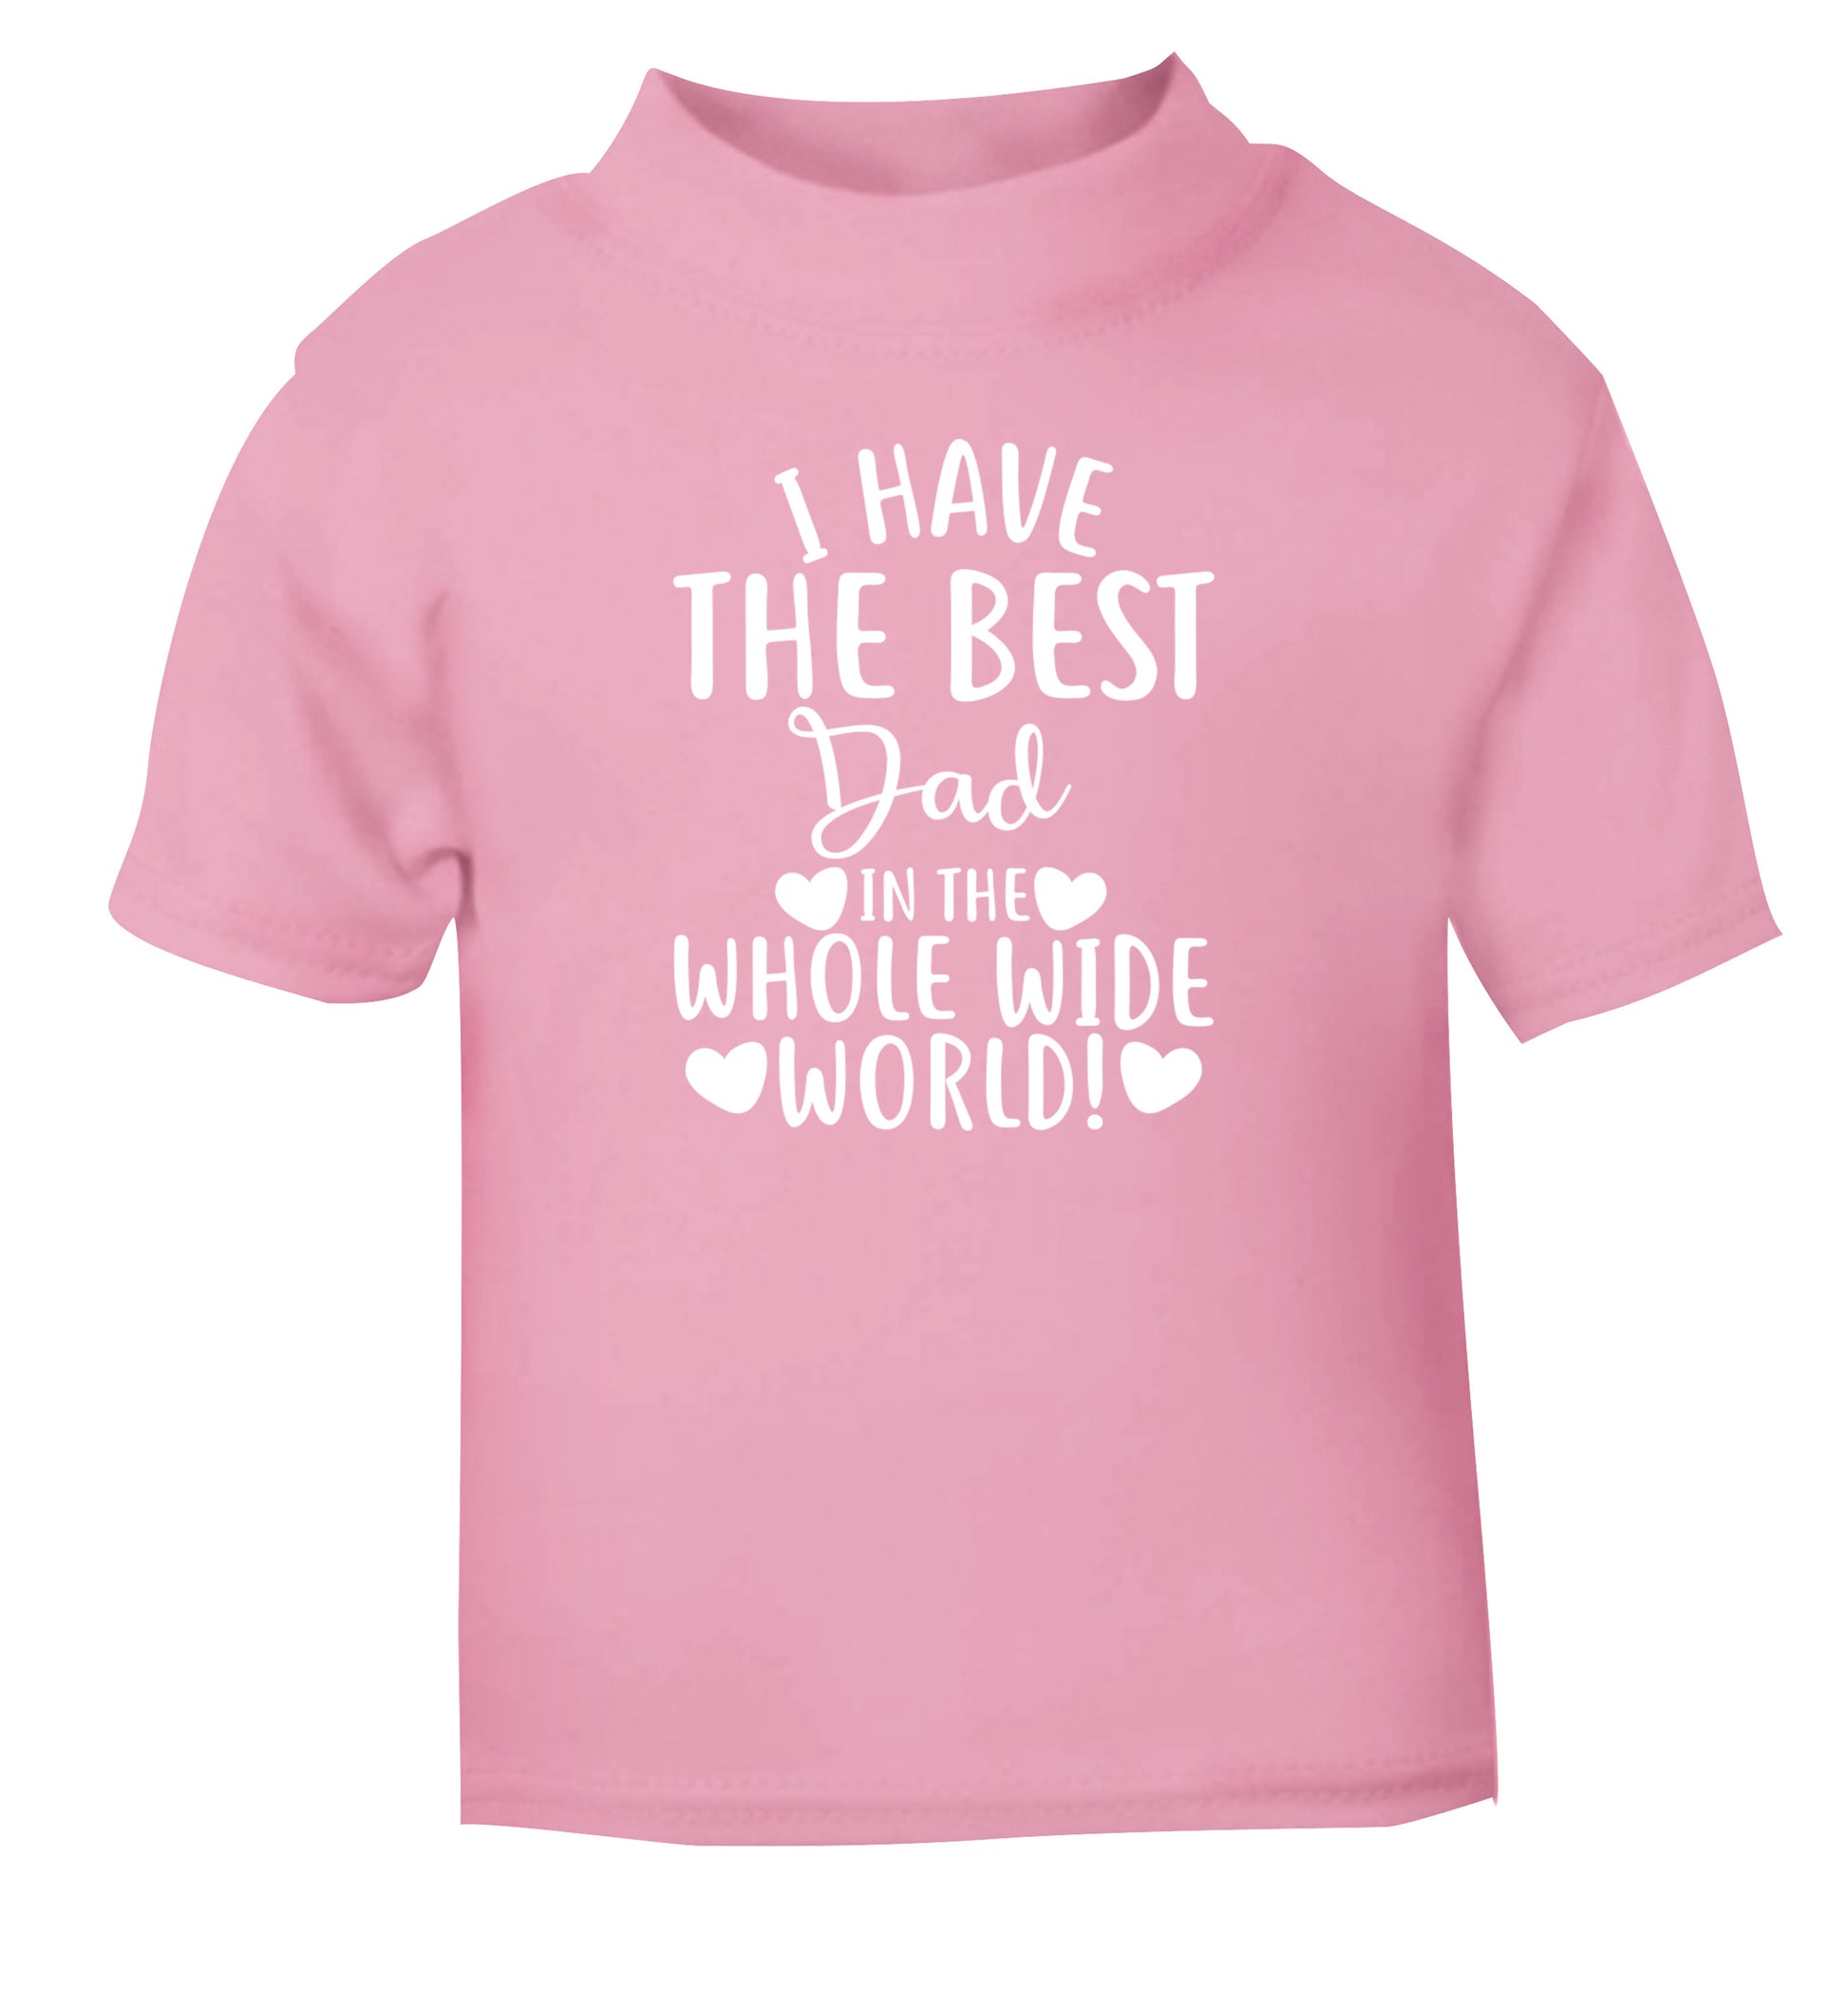 I have the best dad in the whole wide world! light pink Baby Toddler Tshirt 2 Years